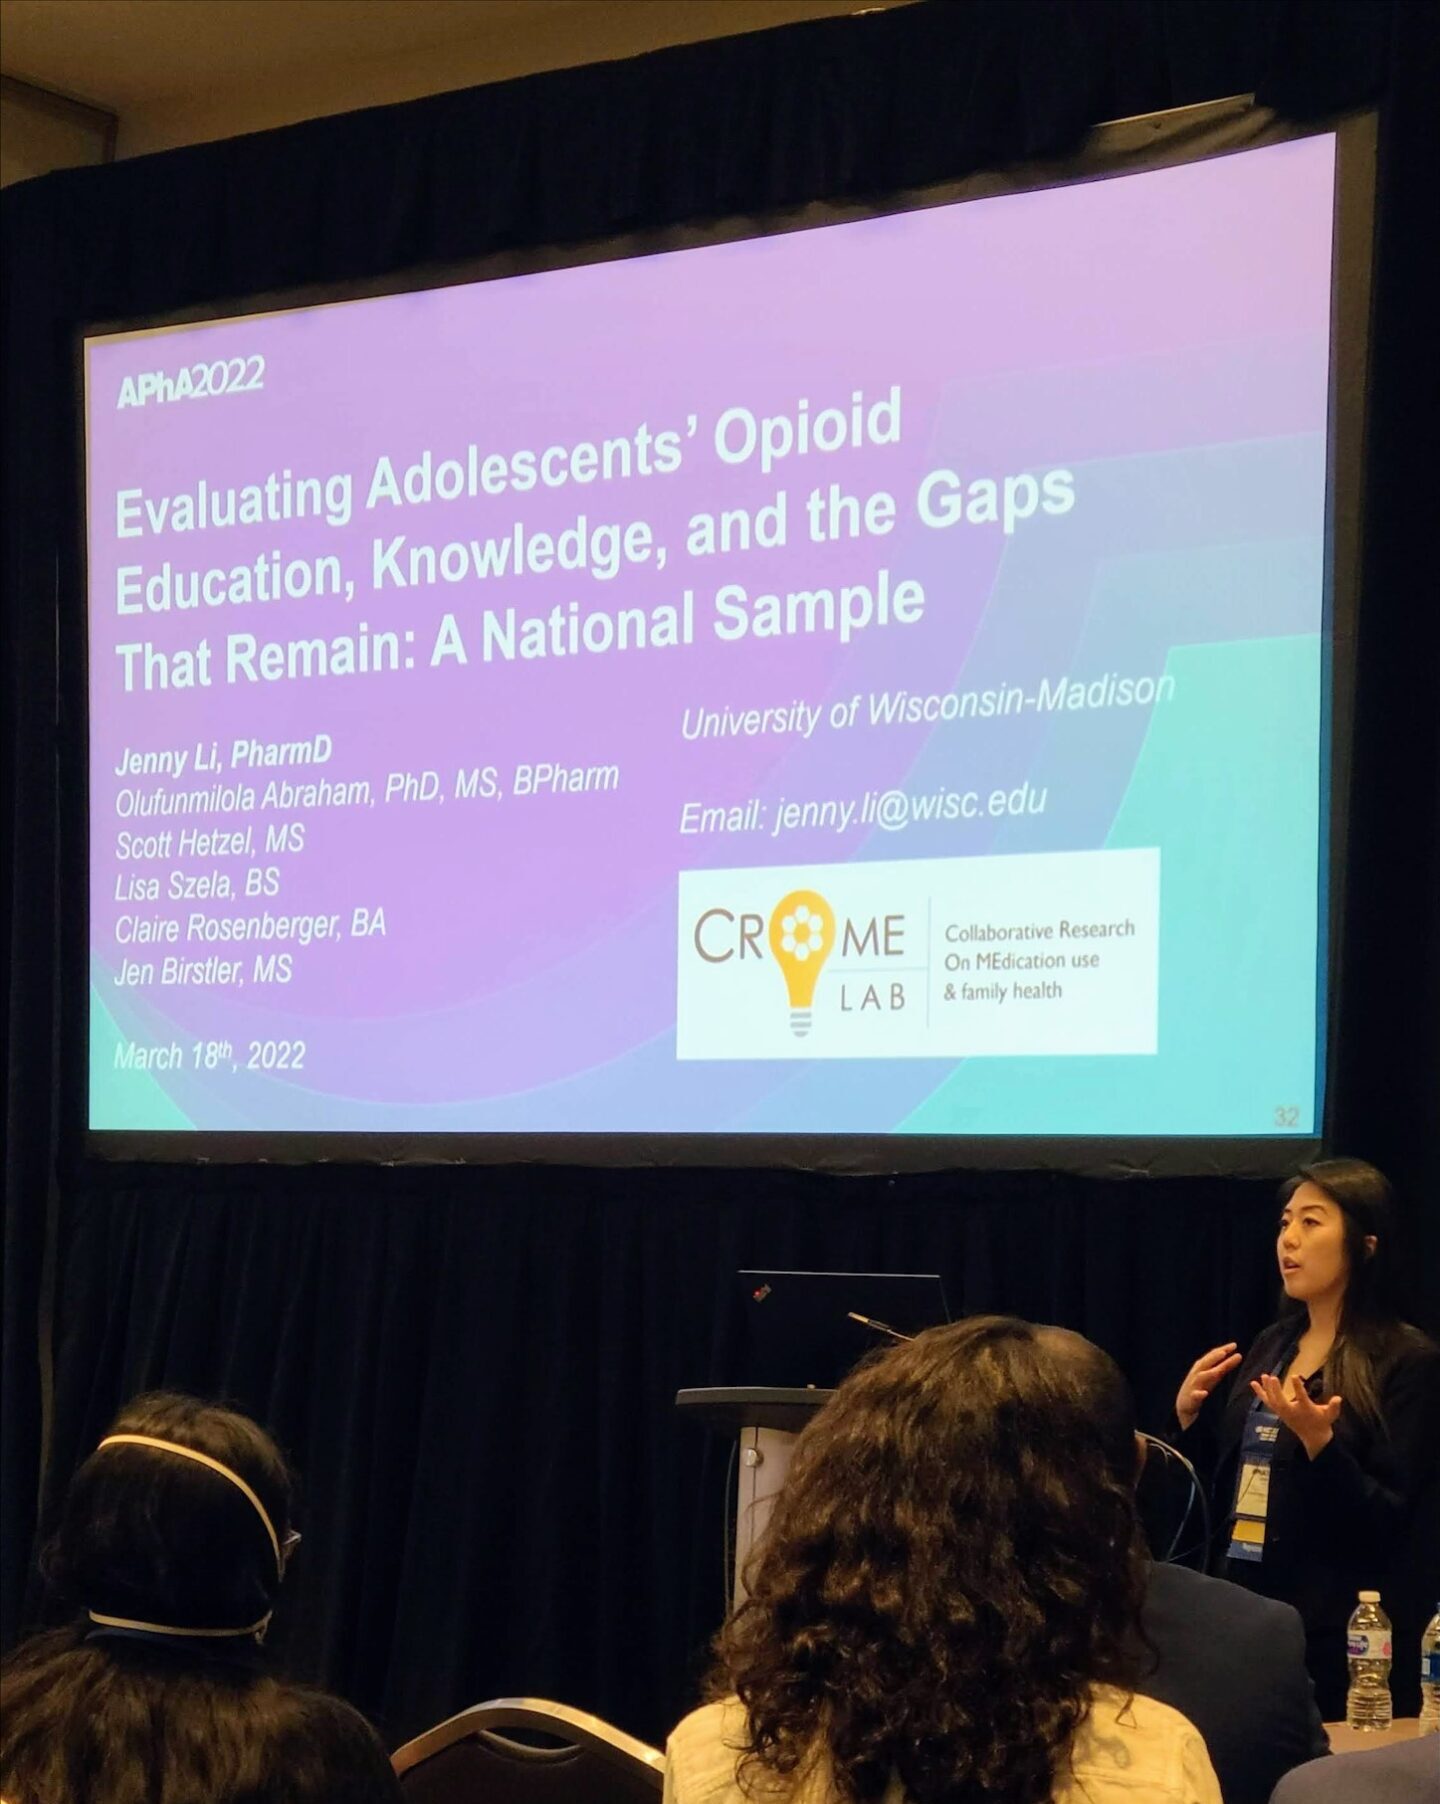 Jenny Li speaking in front of a large screen displaying the title "Evaluating Adolescents' Opioid Education, Knowledge and Gaps That Remain: National Sample"